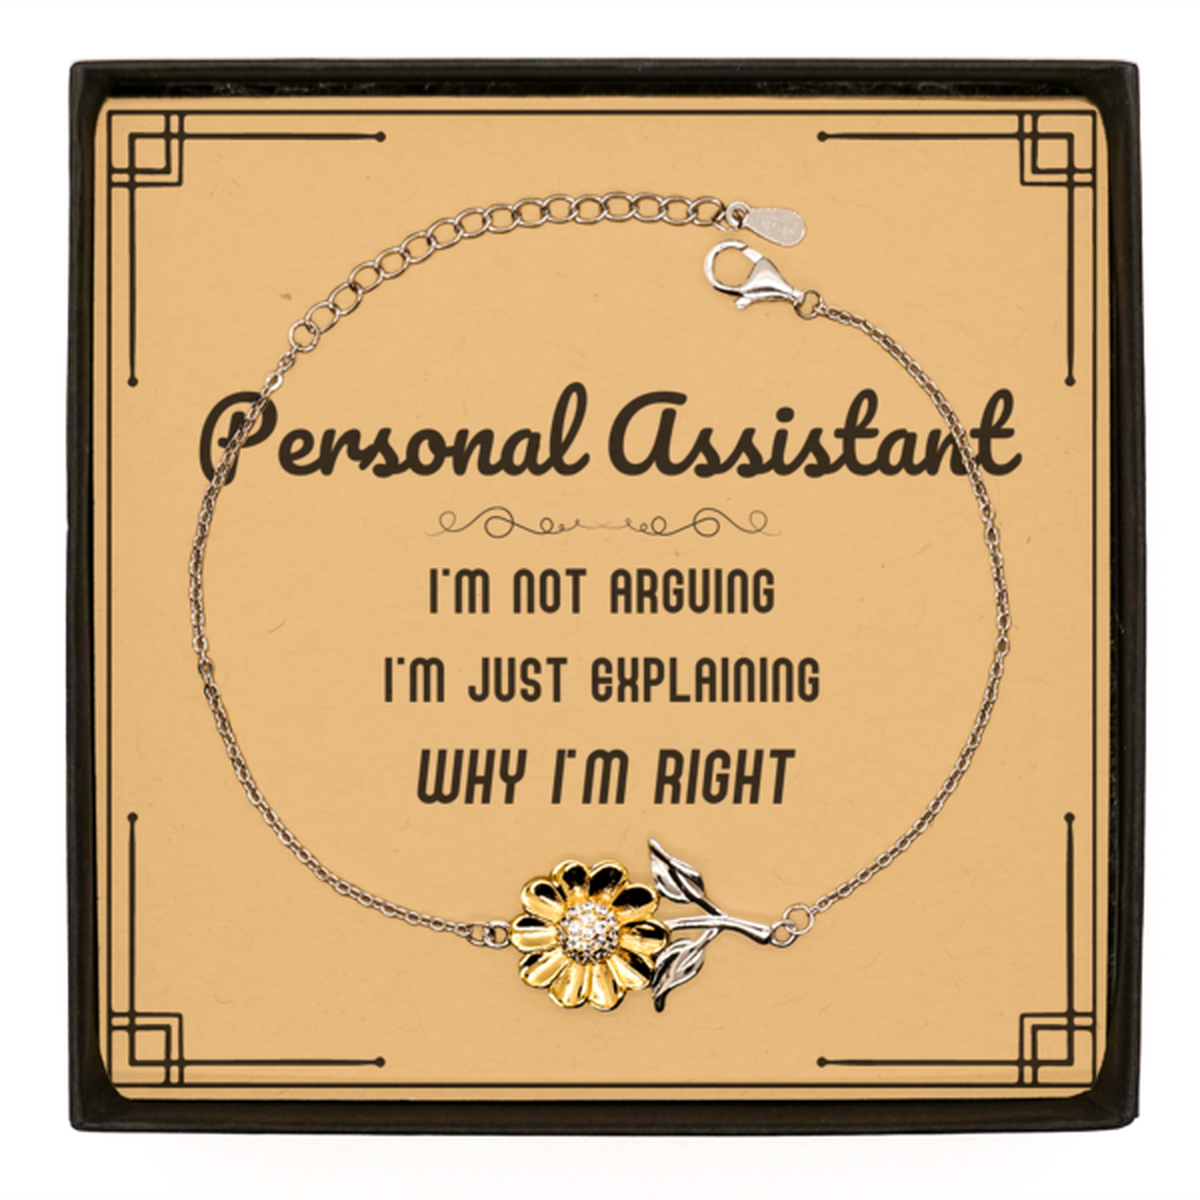 Personal Assistant I'm not Arguing. I'm Just Explaining Why I'm RIGHT Sunflower Bracelet, Funny Saying Quote Personal Assistant Gifts For Personal Assistant Message Card Graduation Birthday Christmas Gifts for Men Women Coworker